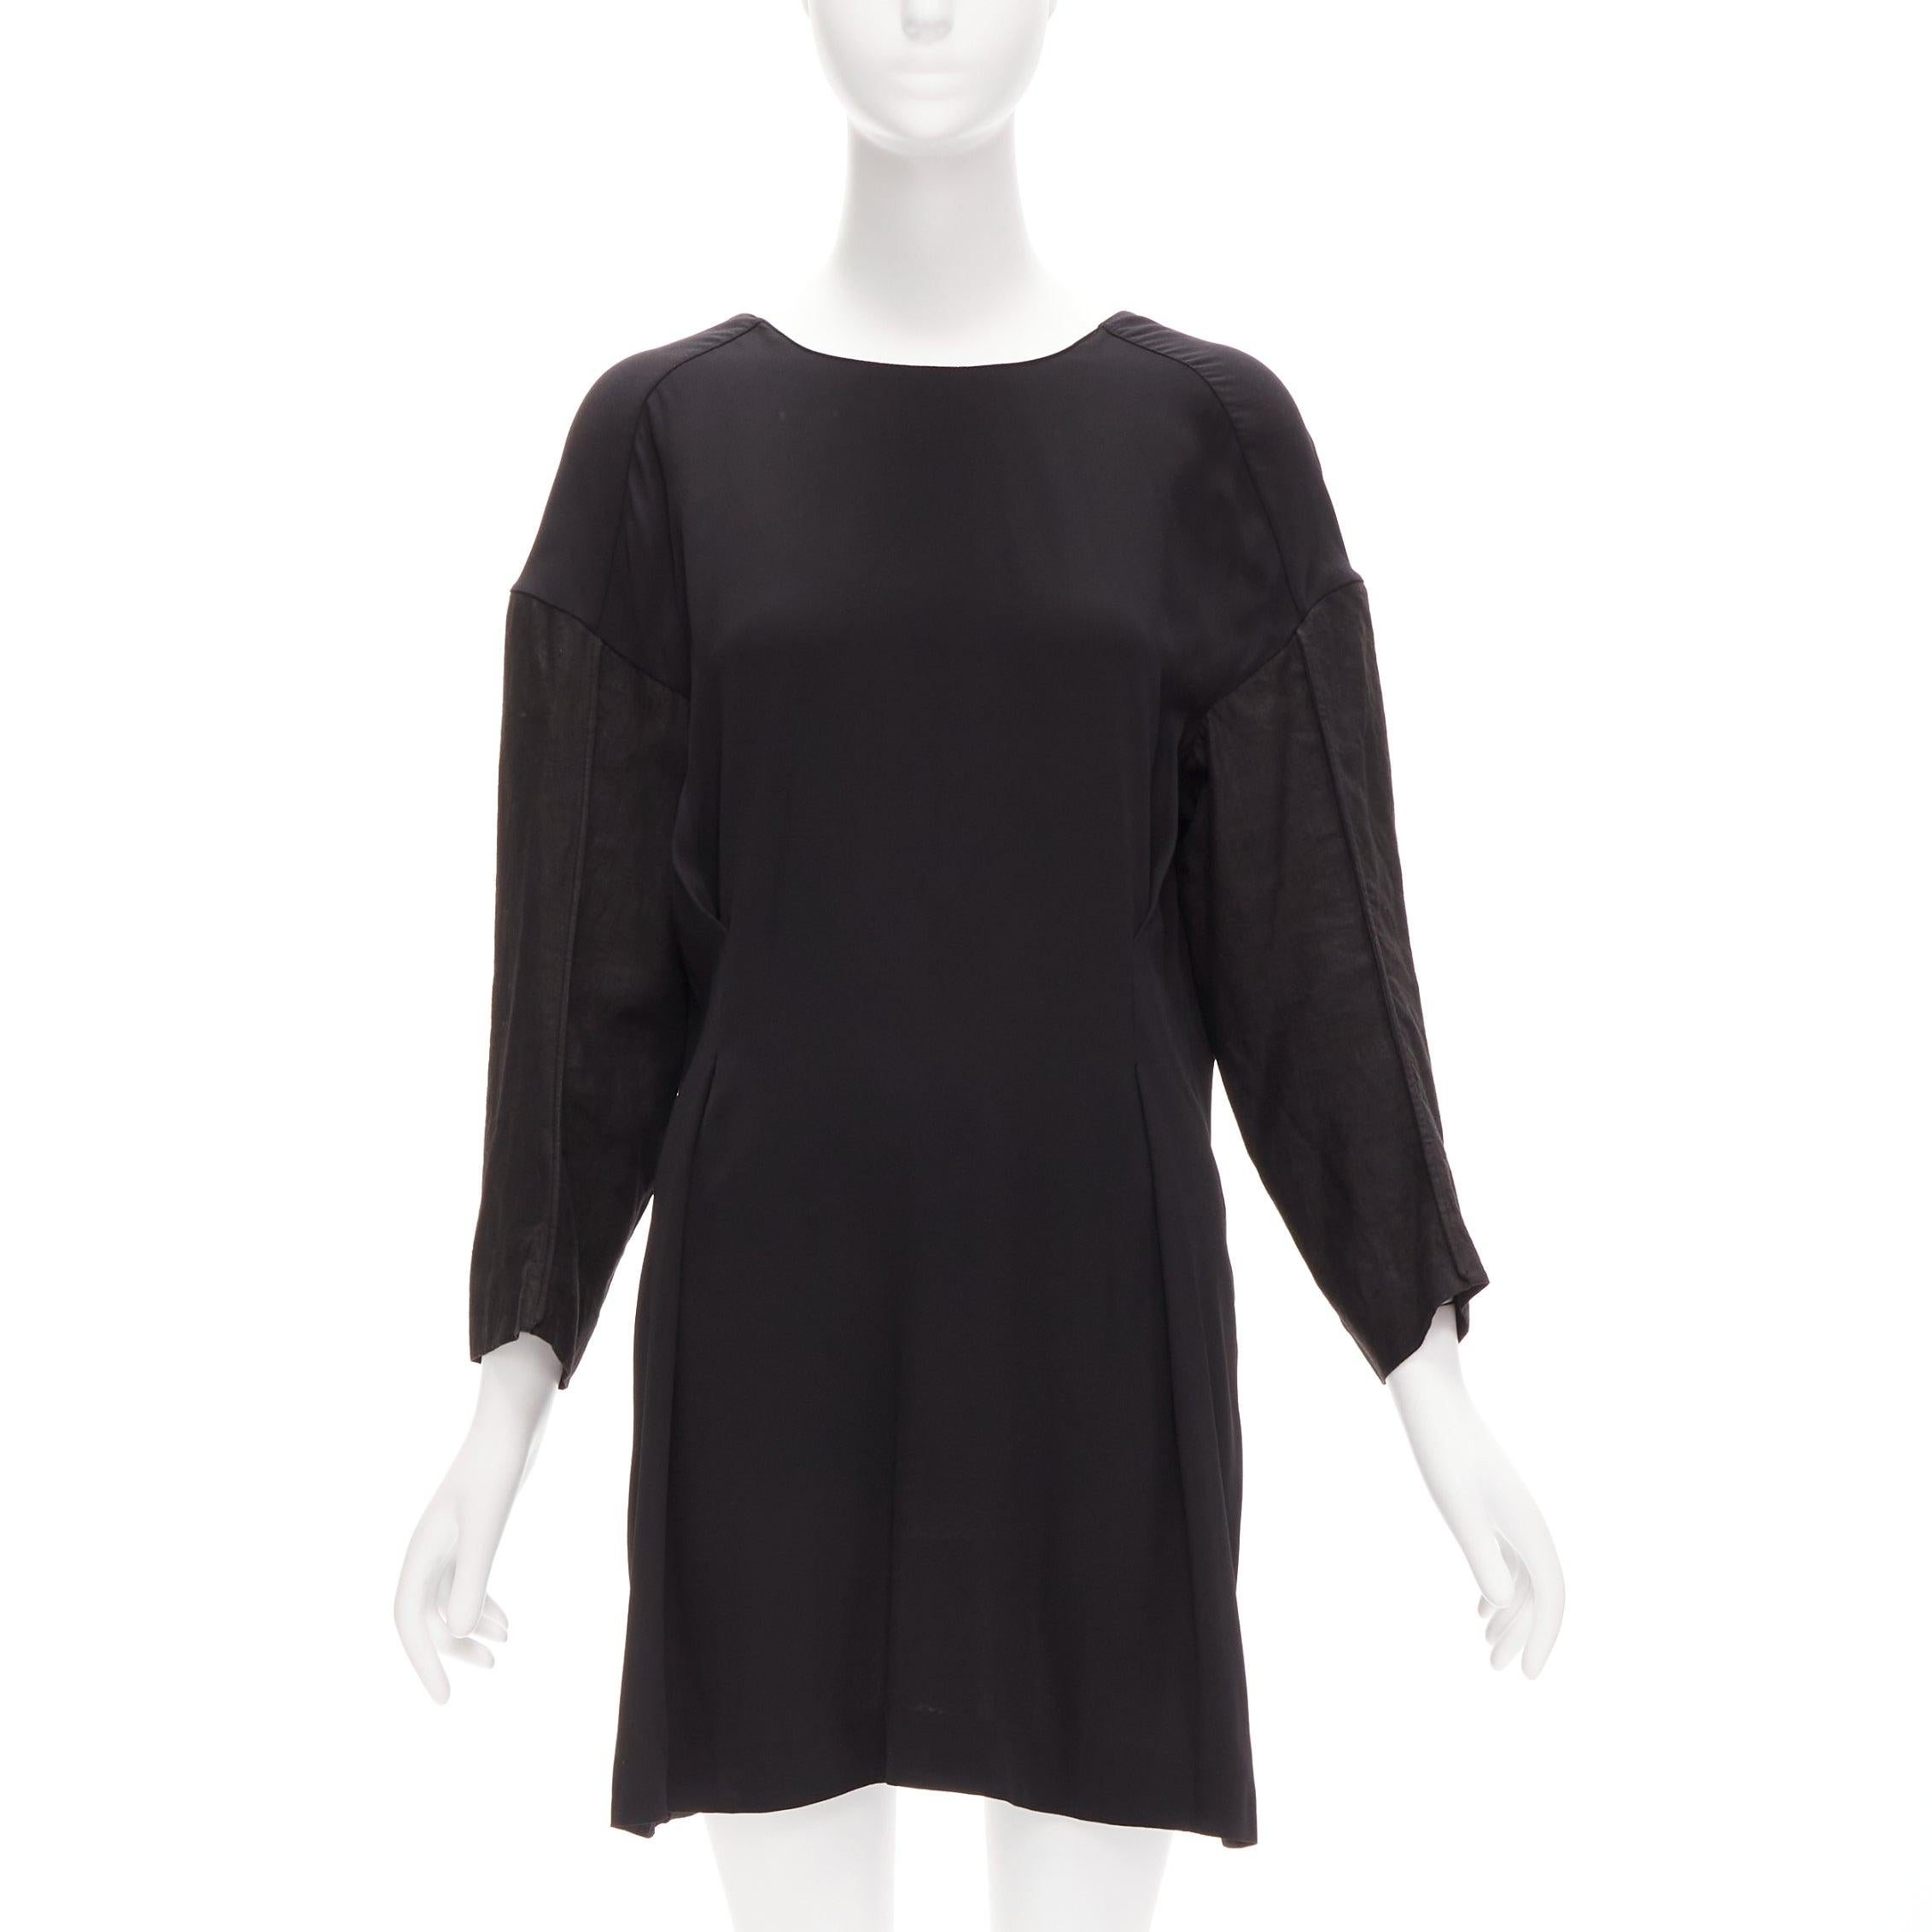 MARNI black grey contrast cutout armhole bateau tie back mini dress IT38 XS
Reference: CELG/A00288
Brand: Marni
Material: Viscose, Blend
Color: Black, Grey
Pattern: Solid
Closure: Self Tie
Extra Details: Tie back with V neck design. Armhole cut out